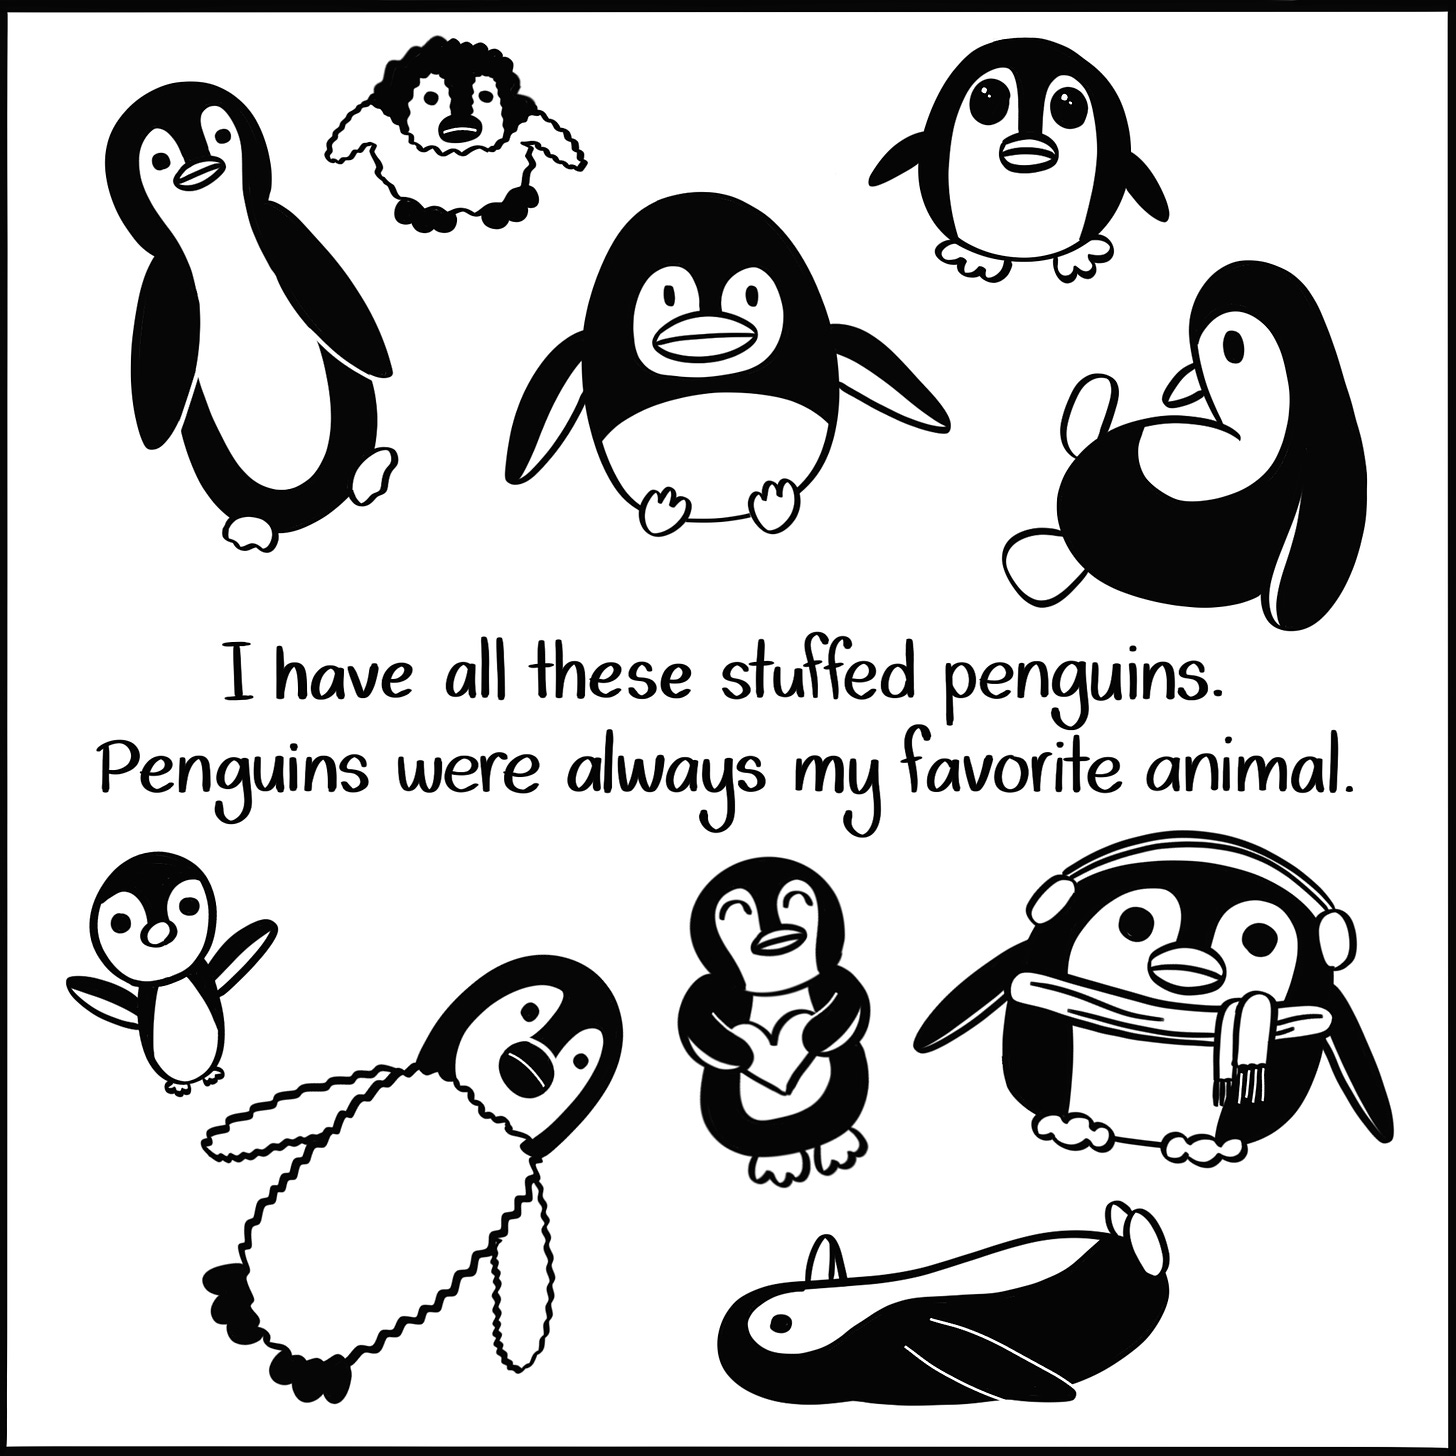 Caption: I have all these stuffed penguins. Penguins were always my favorite animal. Image: Ten stuffed penguins of all shapes and sizes scattered around the canvas.